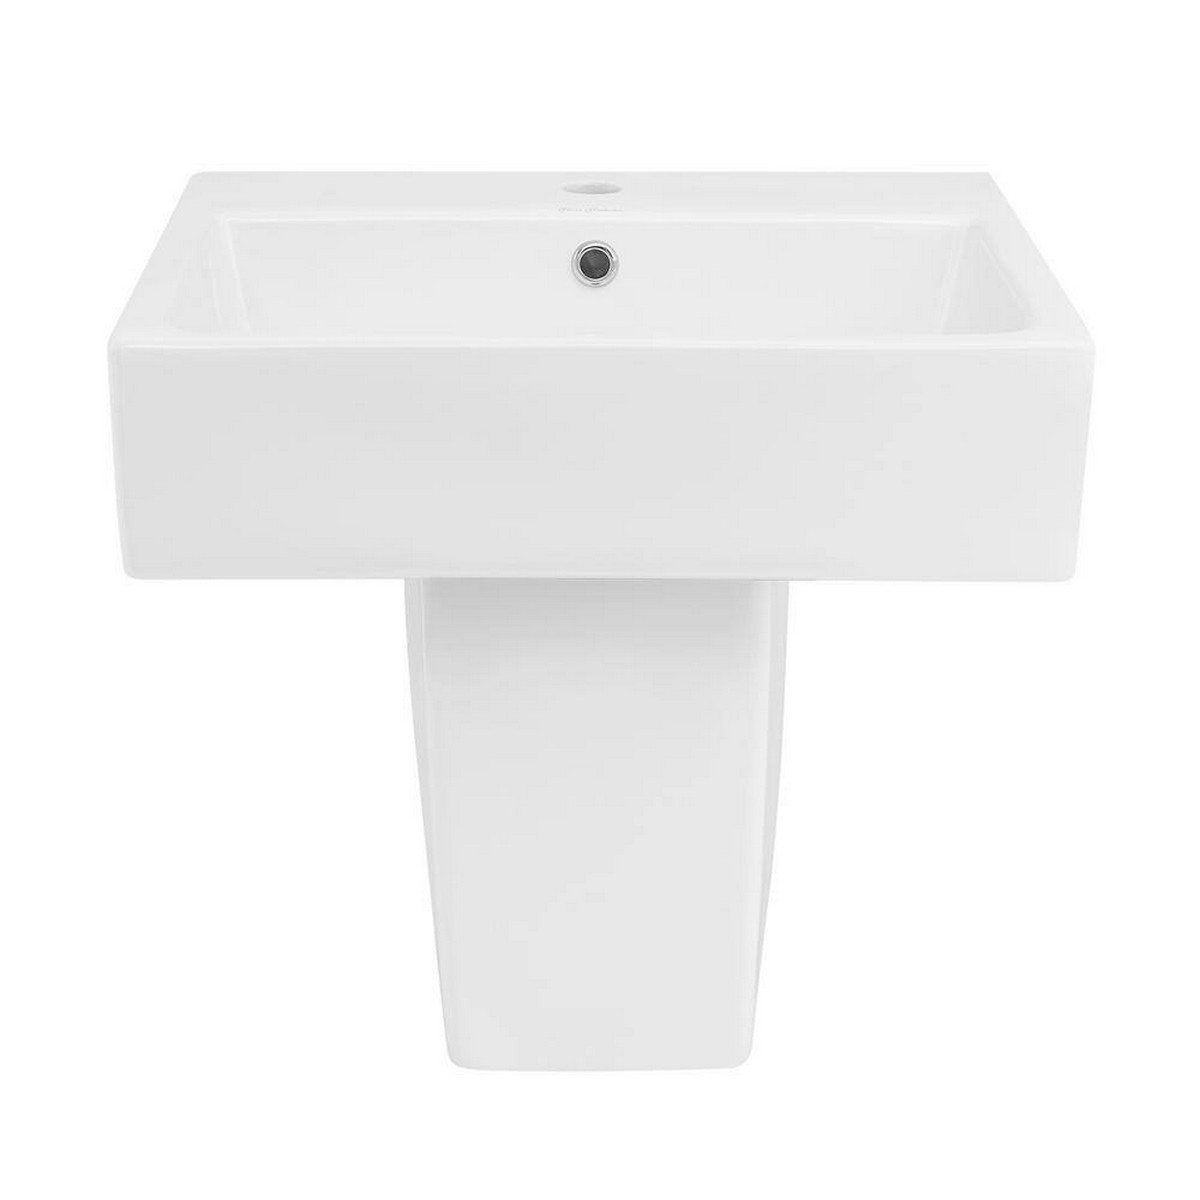 SWISS MADISON SM-WS399 CONCORDE 20 3/4 INCH TWO-PIECE WALL MOUNTED CERAMIC BATHROOM SINK IN GLOSSY WHITE